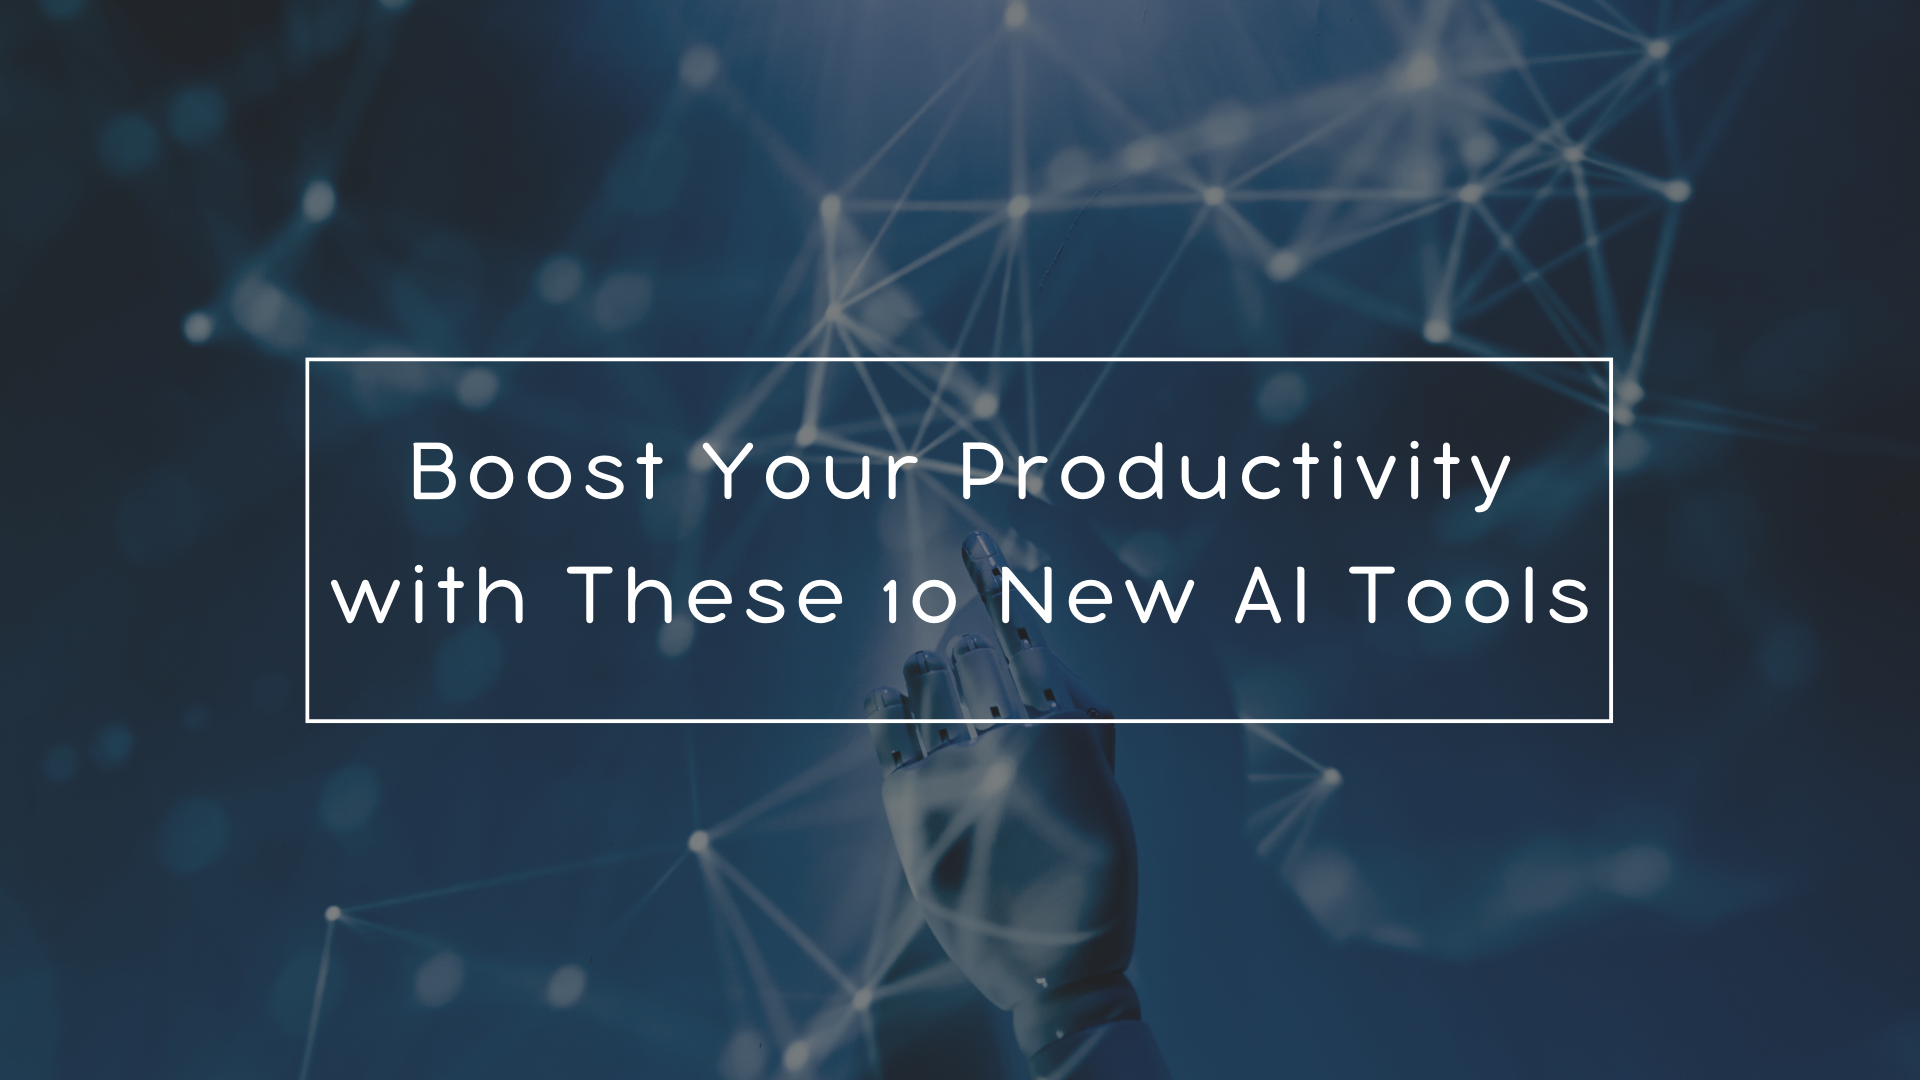 Boost Your Productivity with These 10 New AI Tools